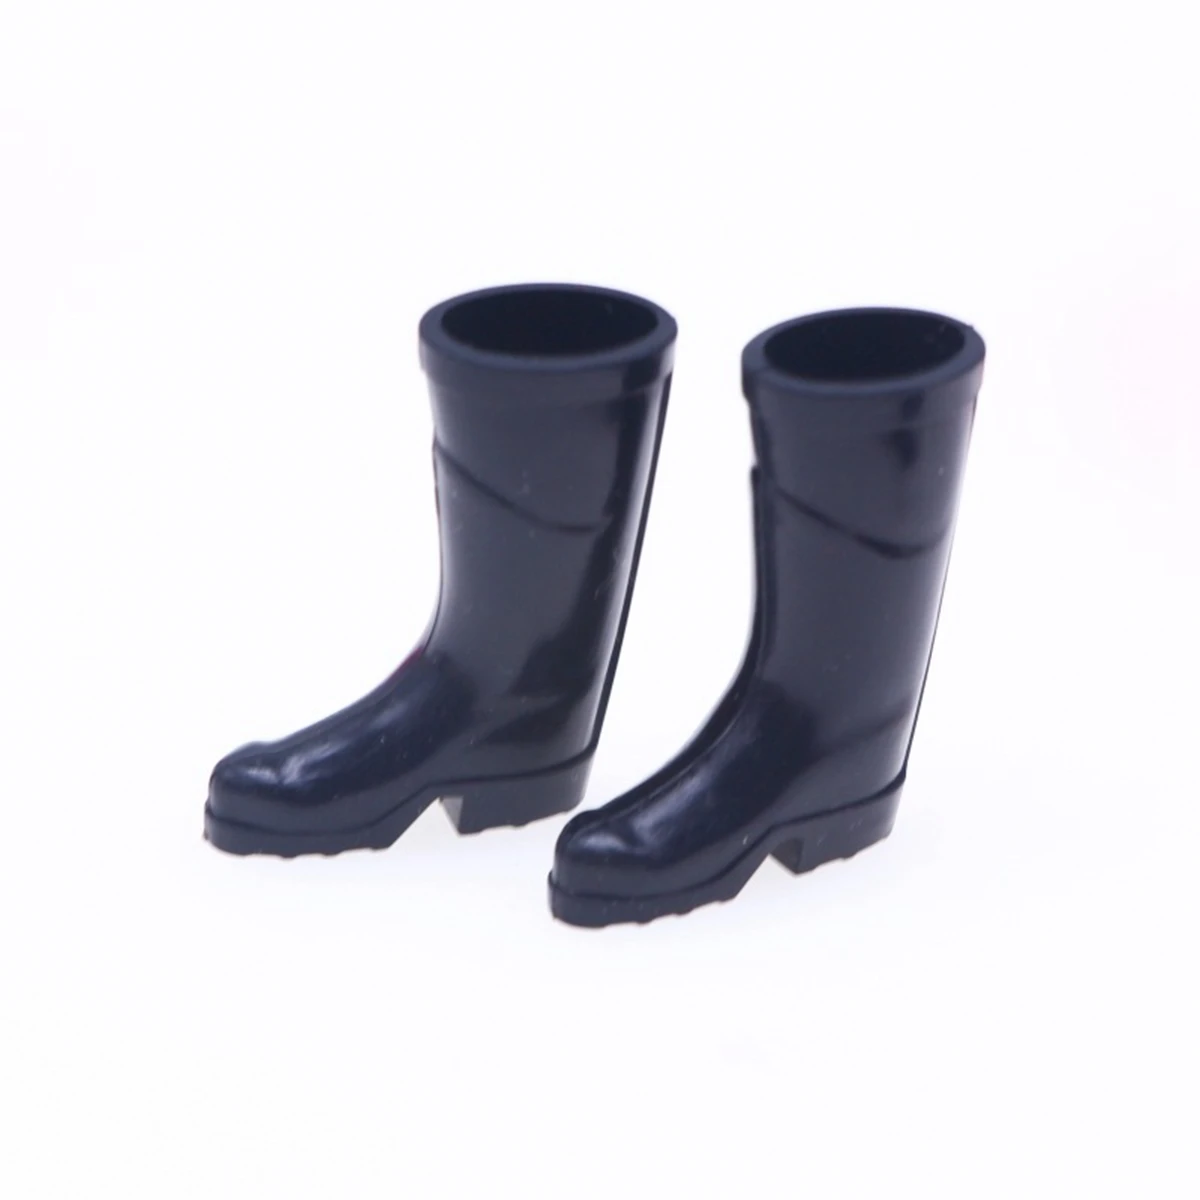 Children's Toys Doll House Mini Cute Rain Boots Simulation Rain Boots Gardening Straight Silicone Shoes